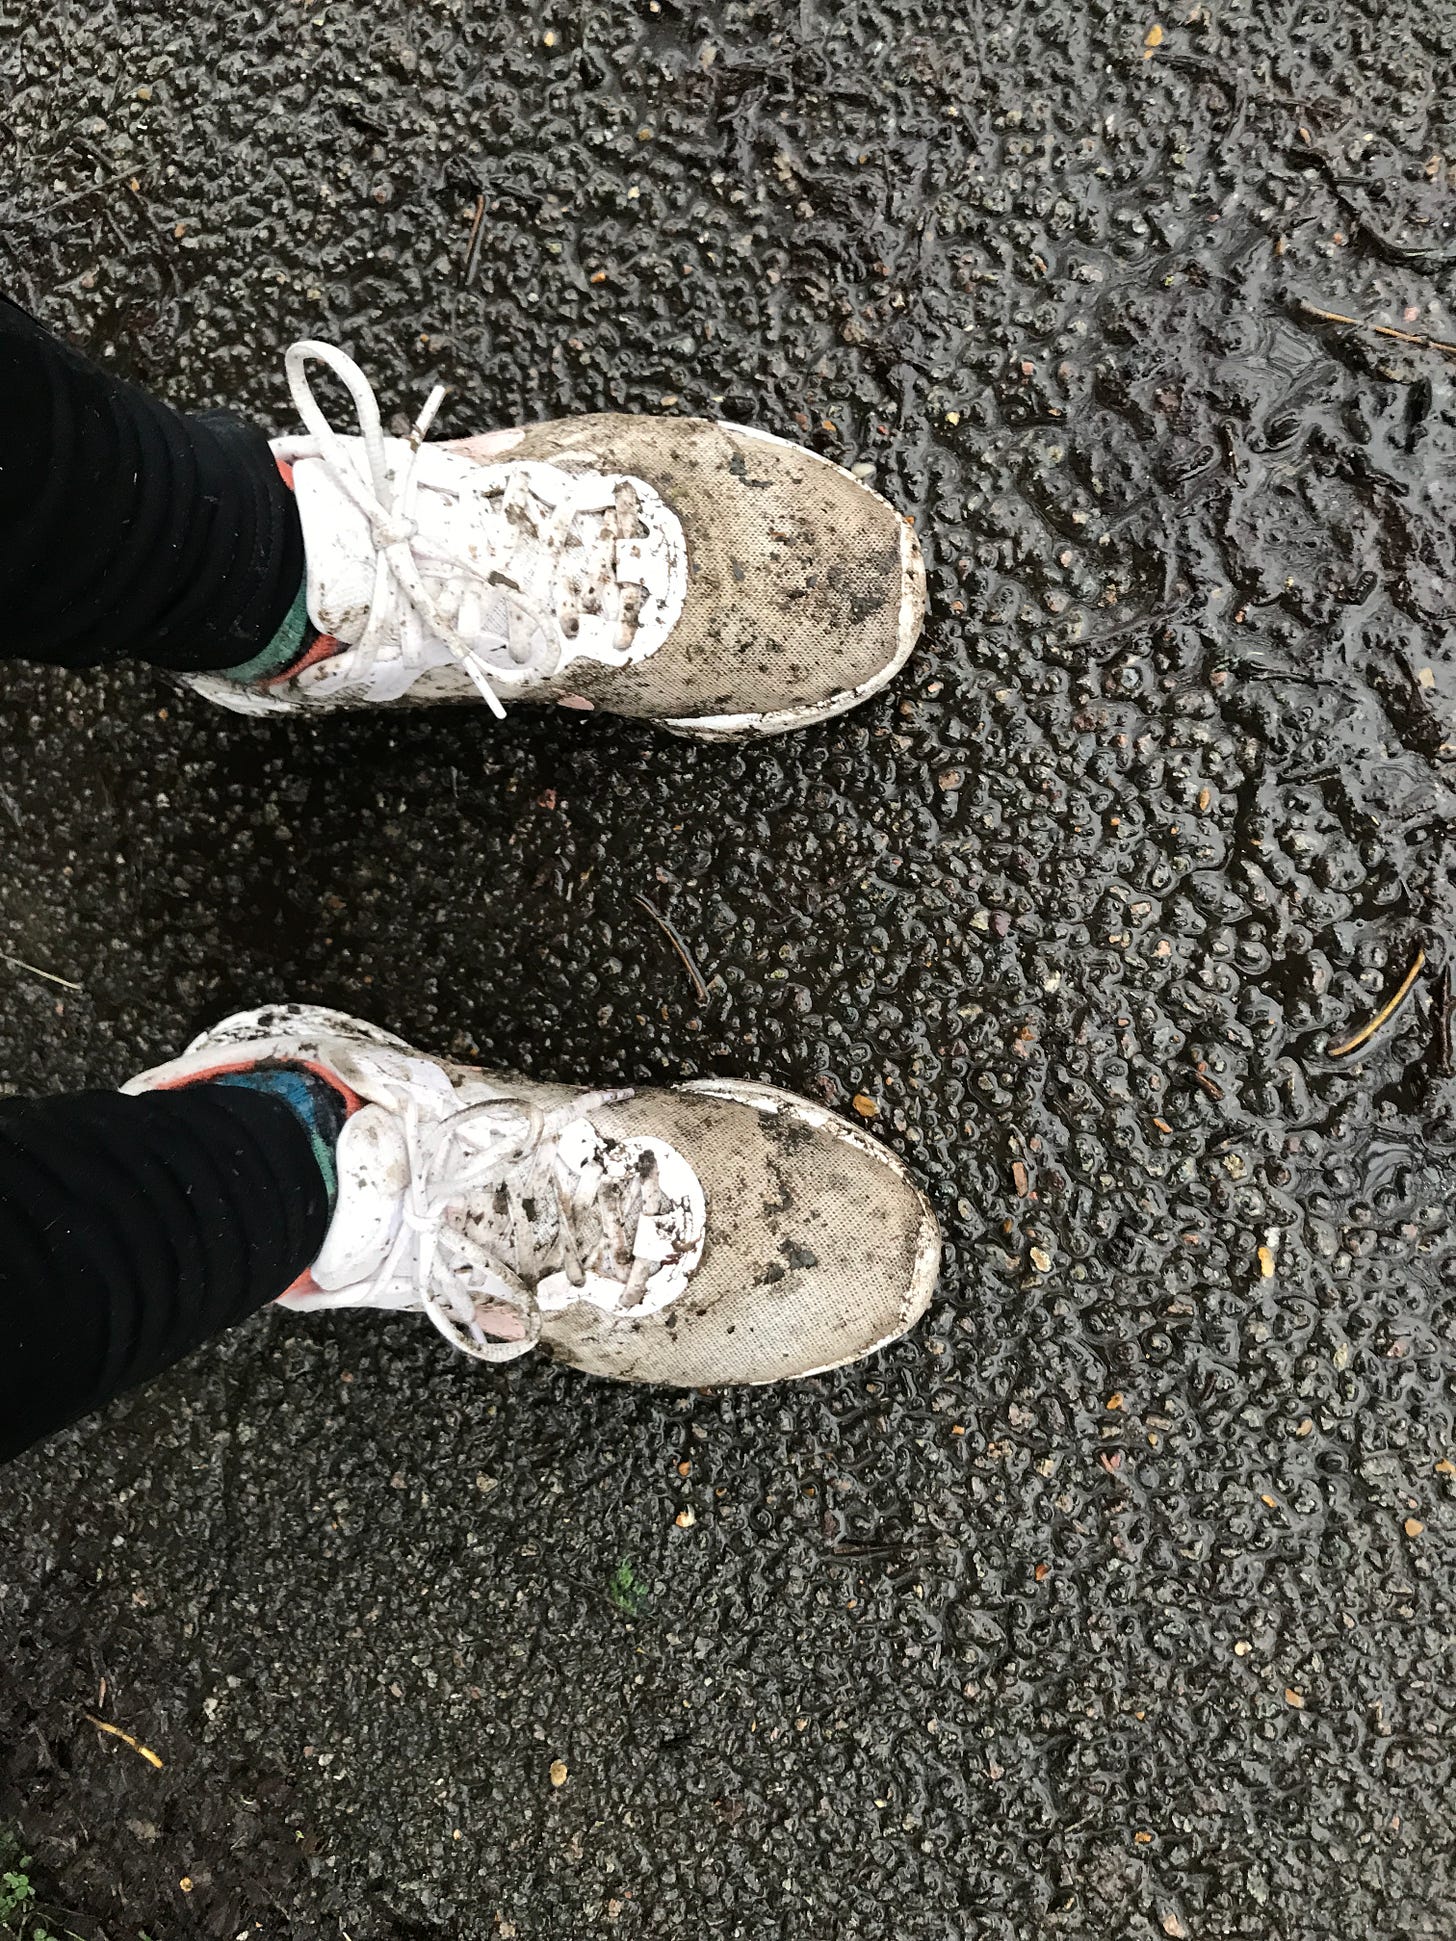 Muddy running shoes on wet pavement